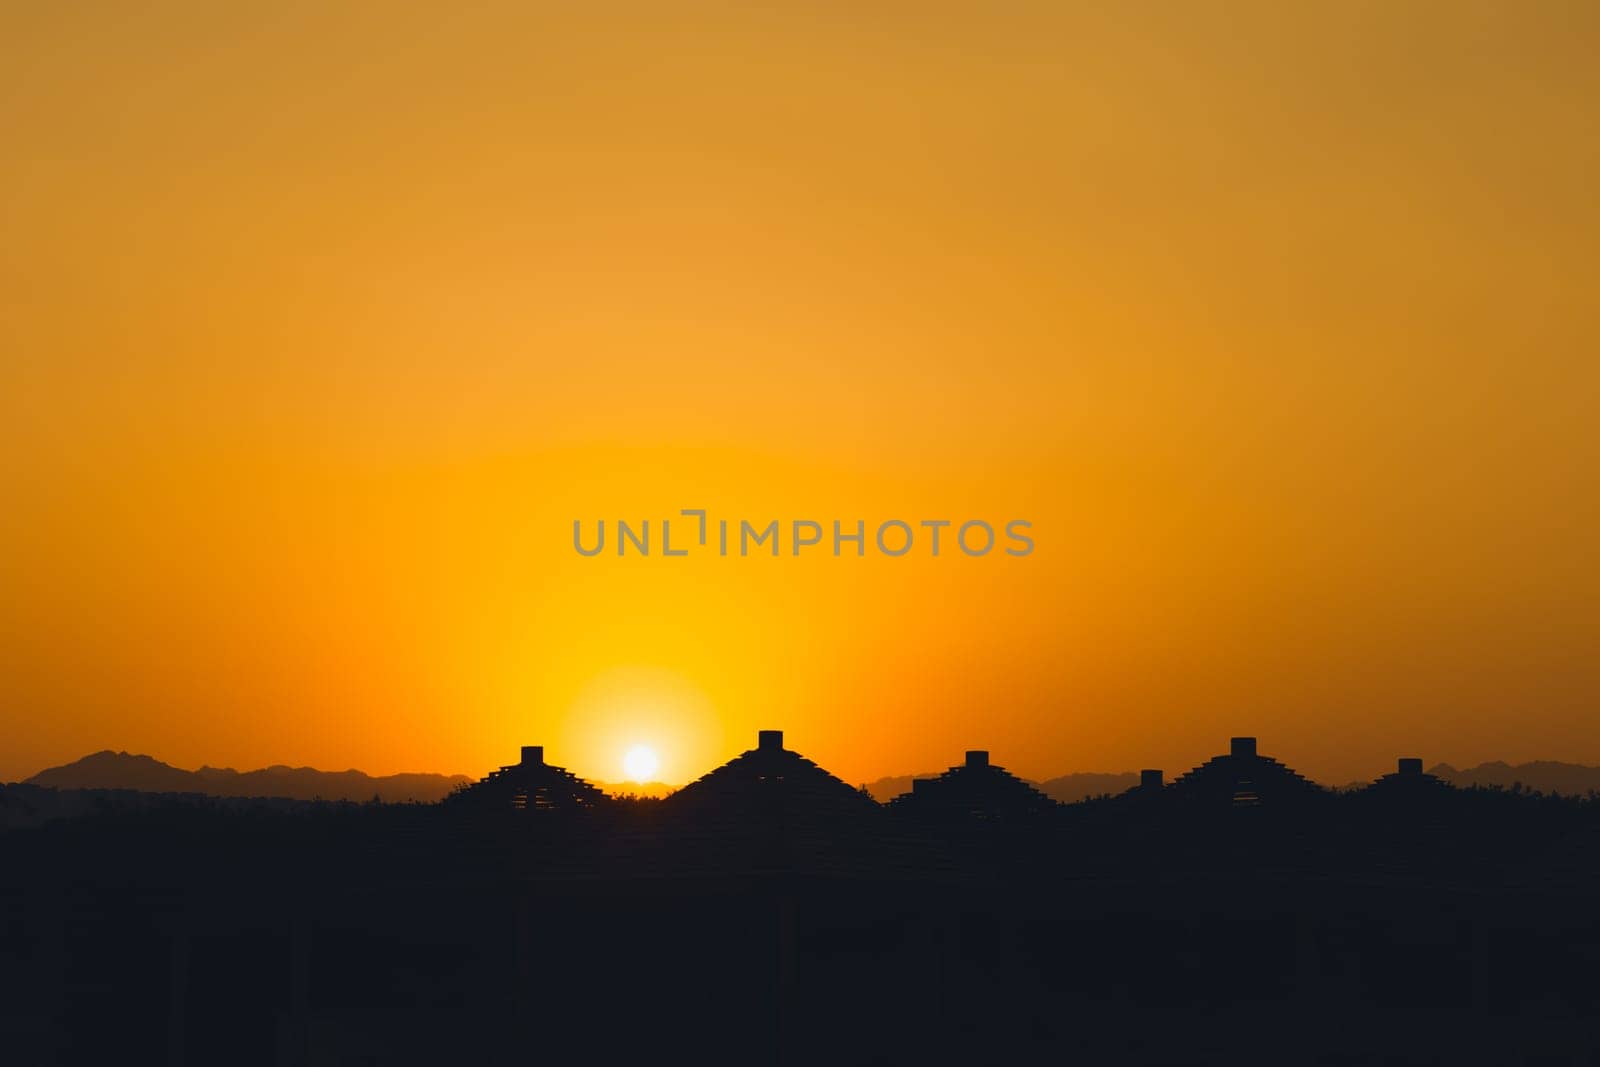 Majestic dusk in tropics. Goden sunset sky with beautiful silhouette roofs beach umbrellas and mountains in the evening. Warm orange colors. Abstract nature and travel background. Egypt summer